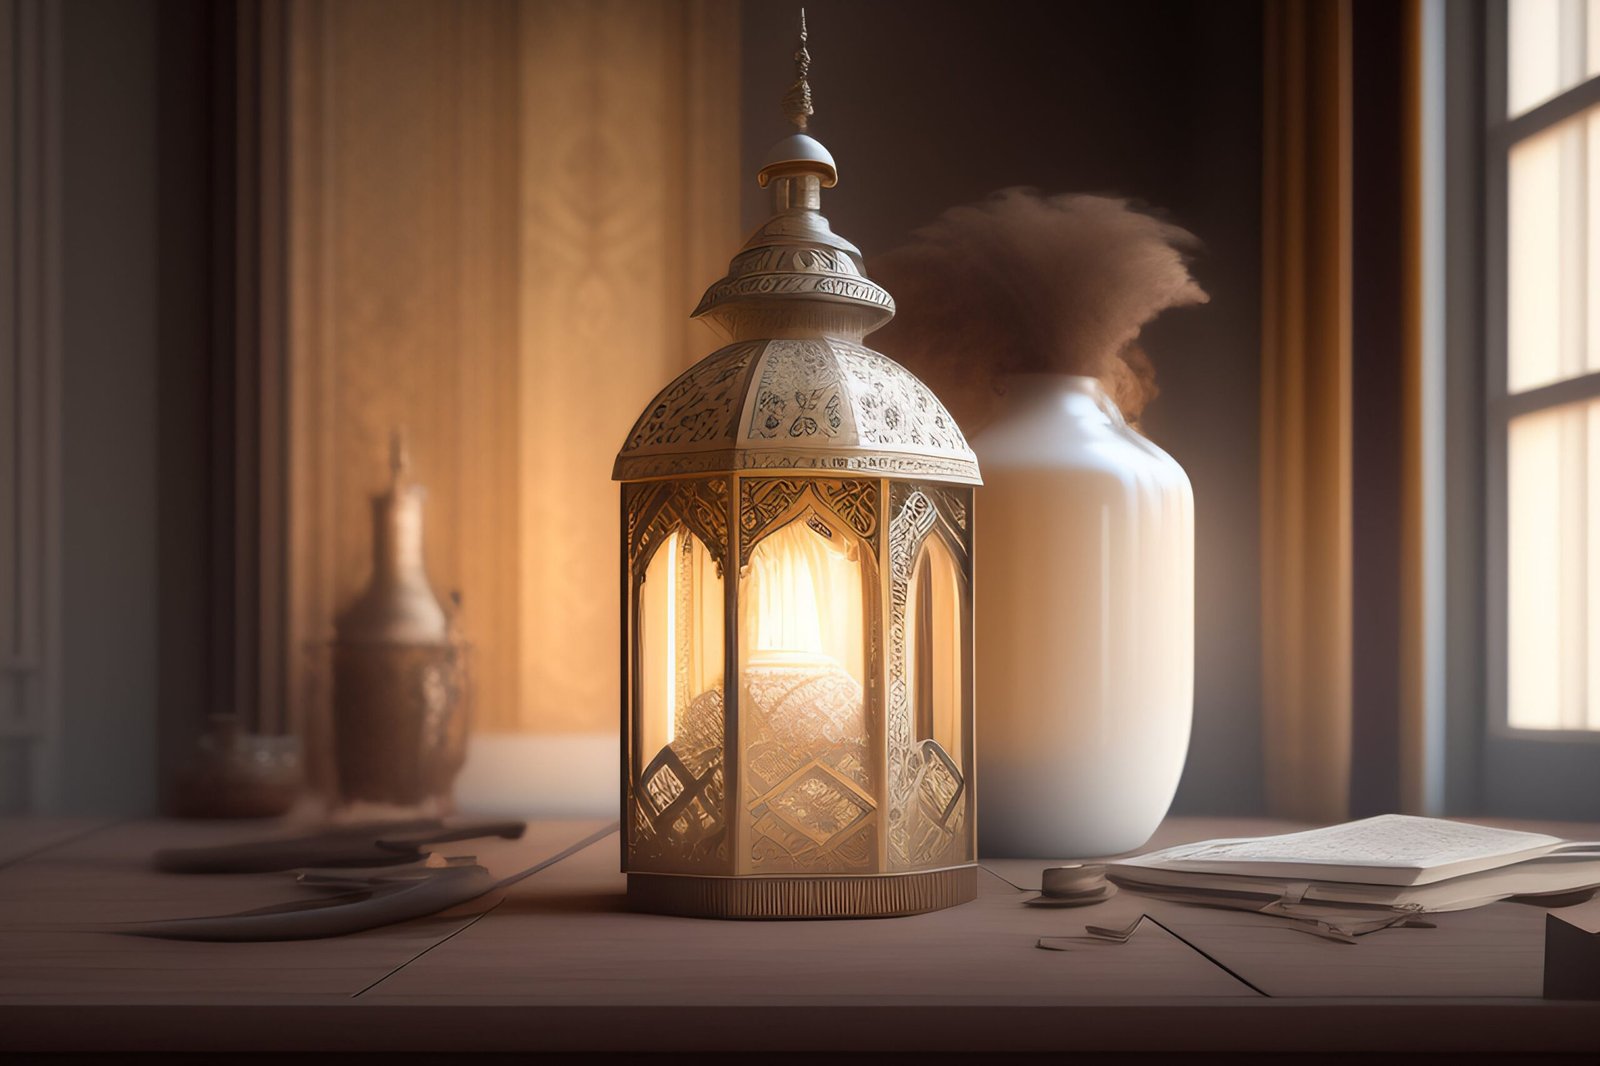 Moroccan lantern on a table.